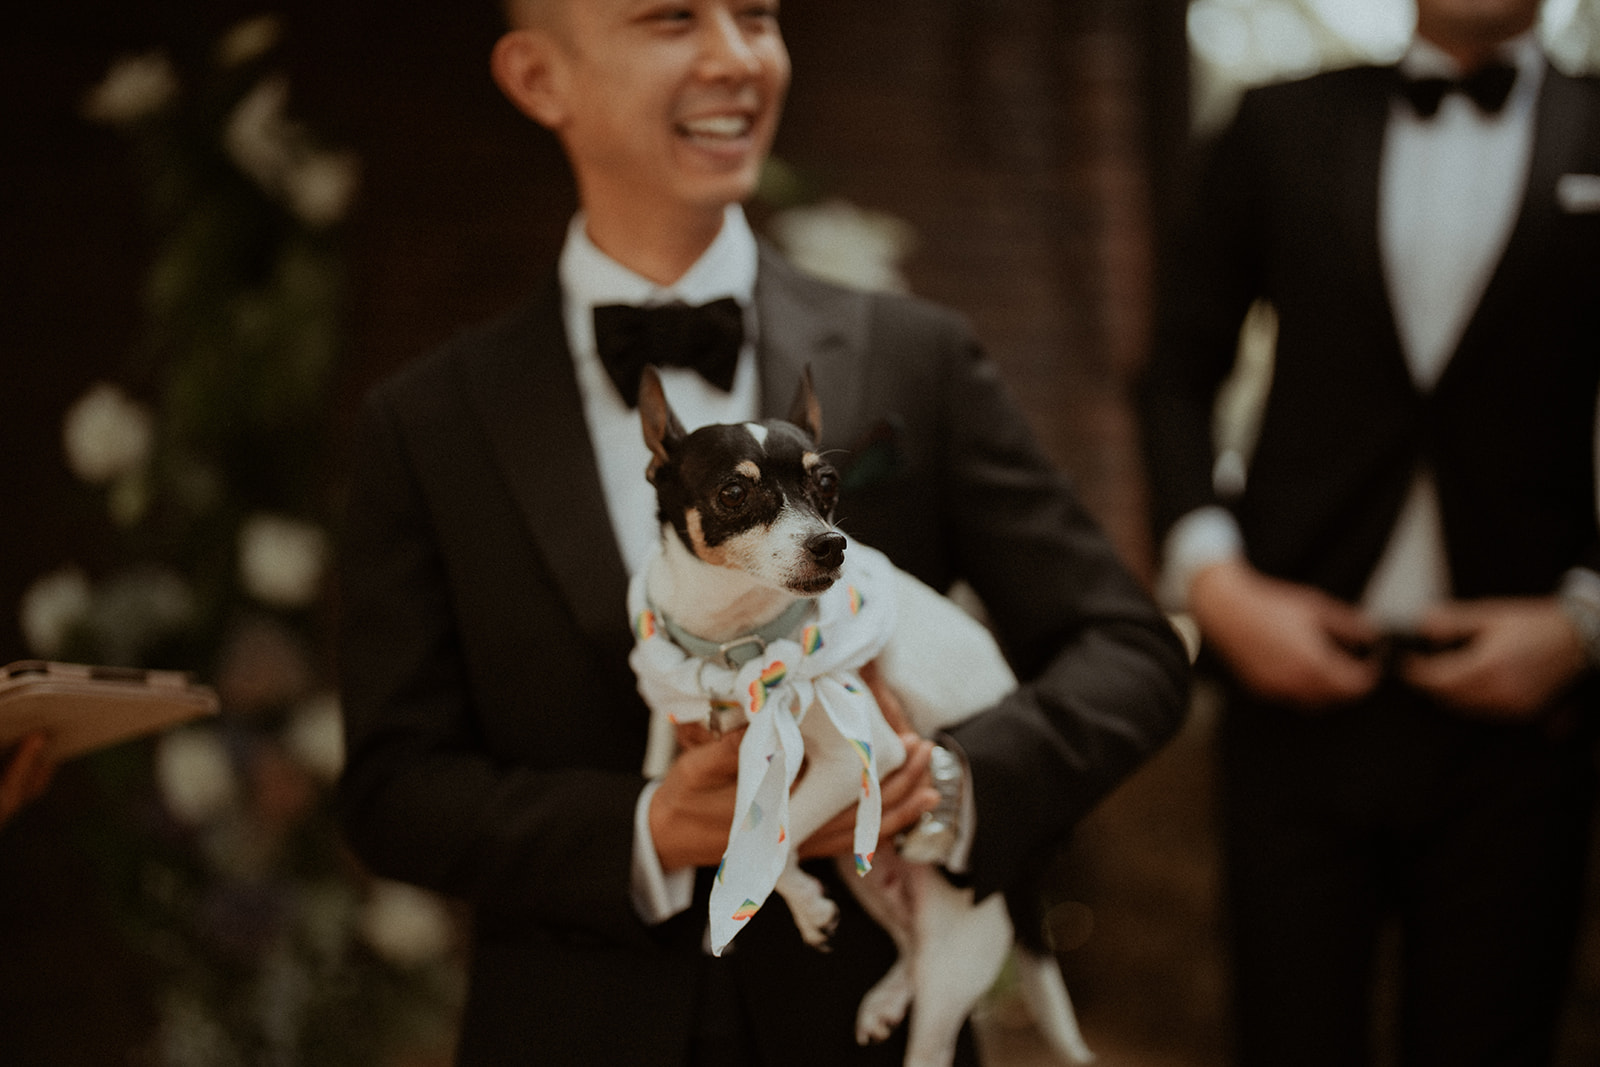 Groom at the ceremony, holding his little dog